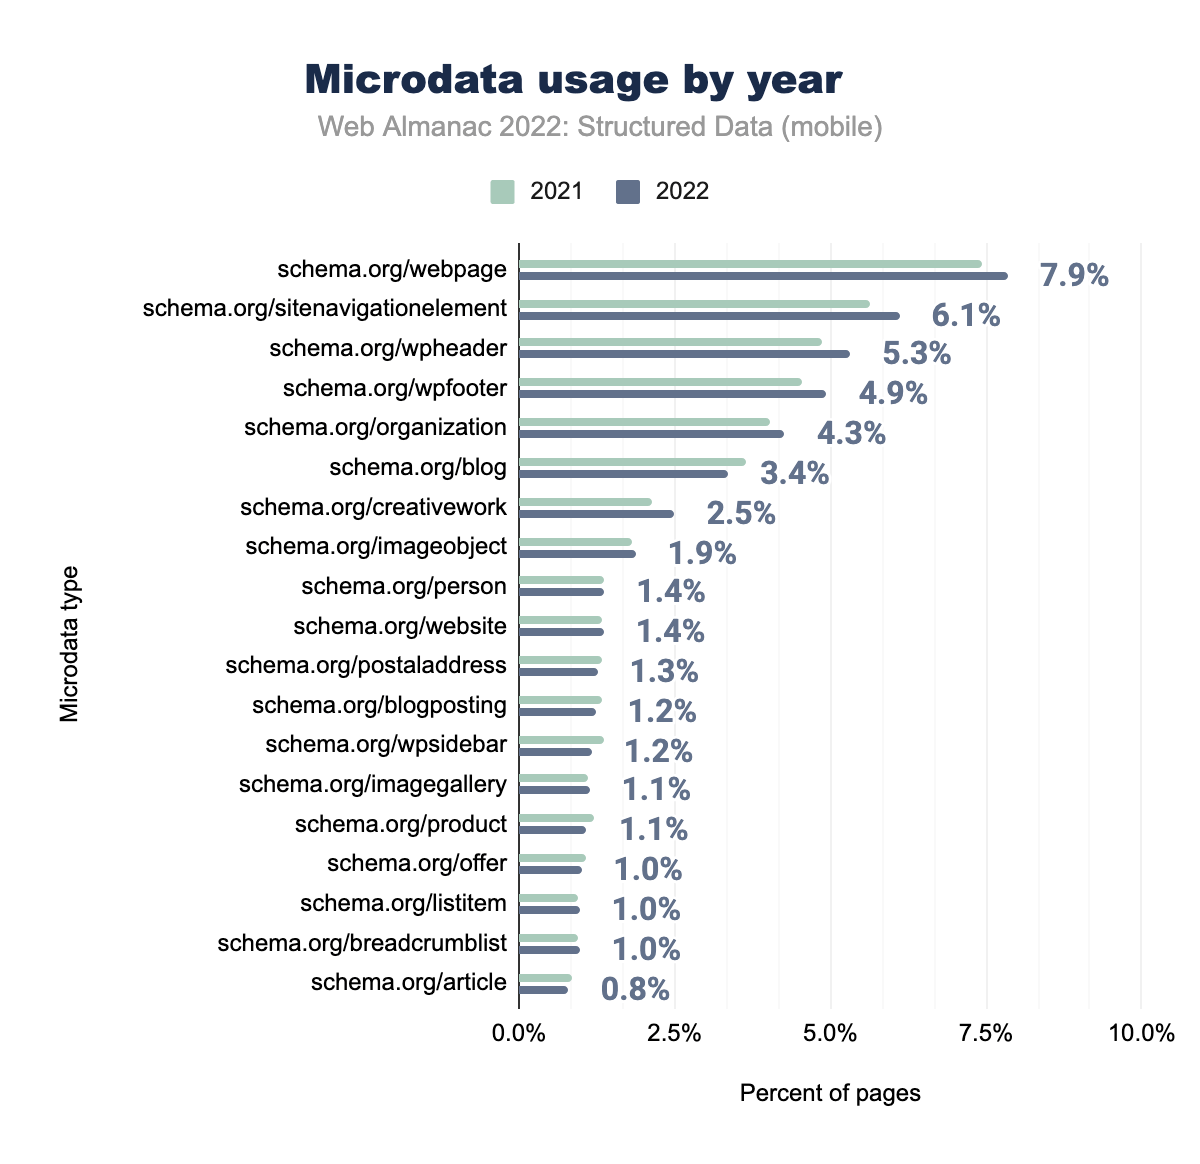 Microdata usage by year (mobile)